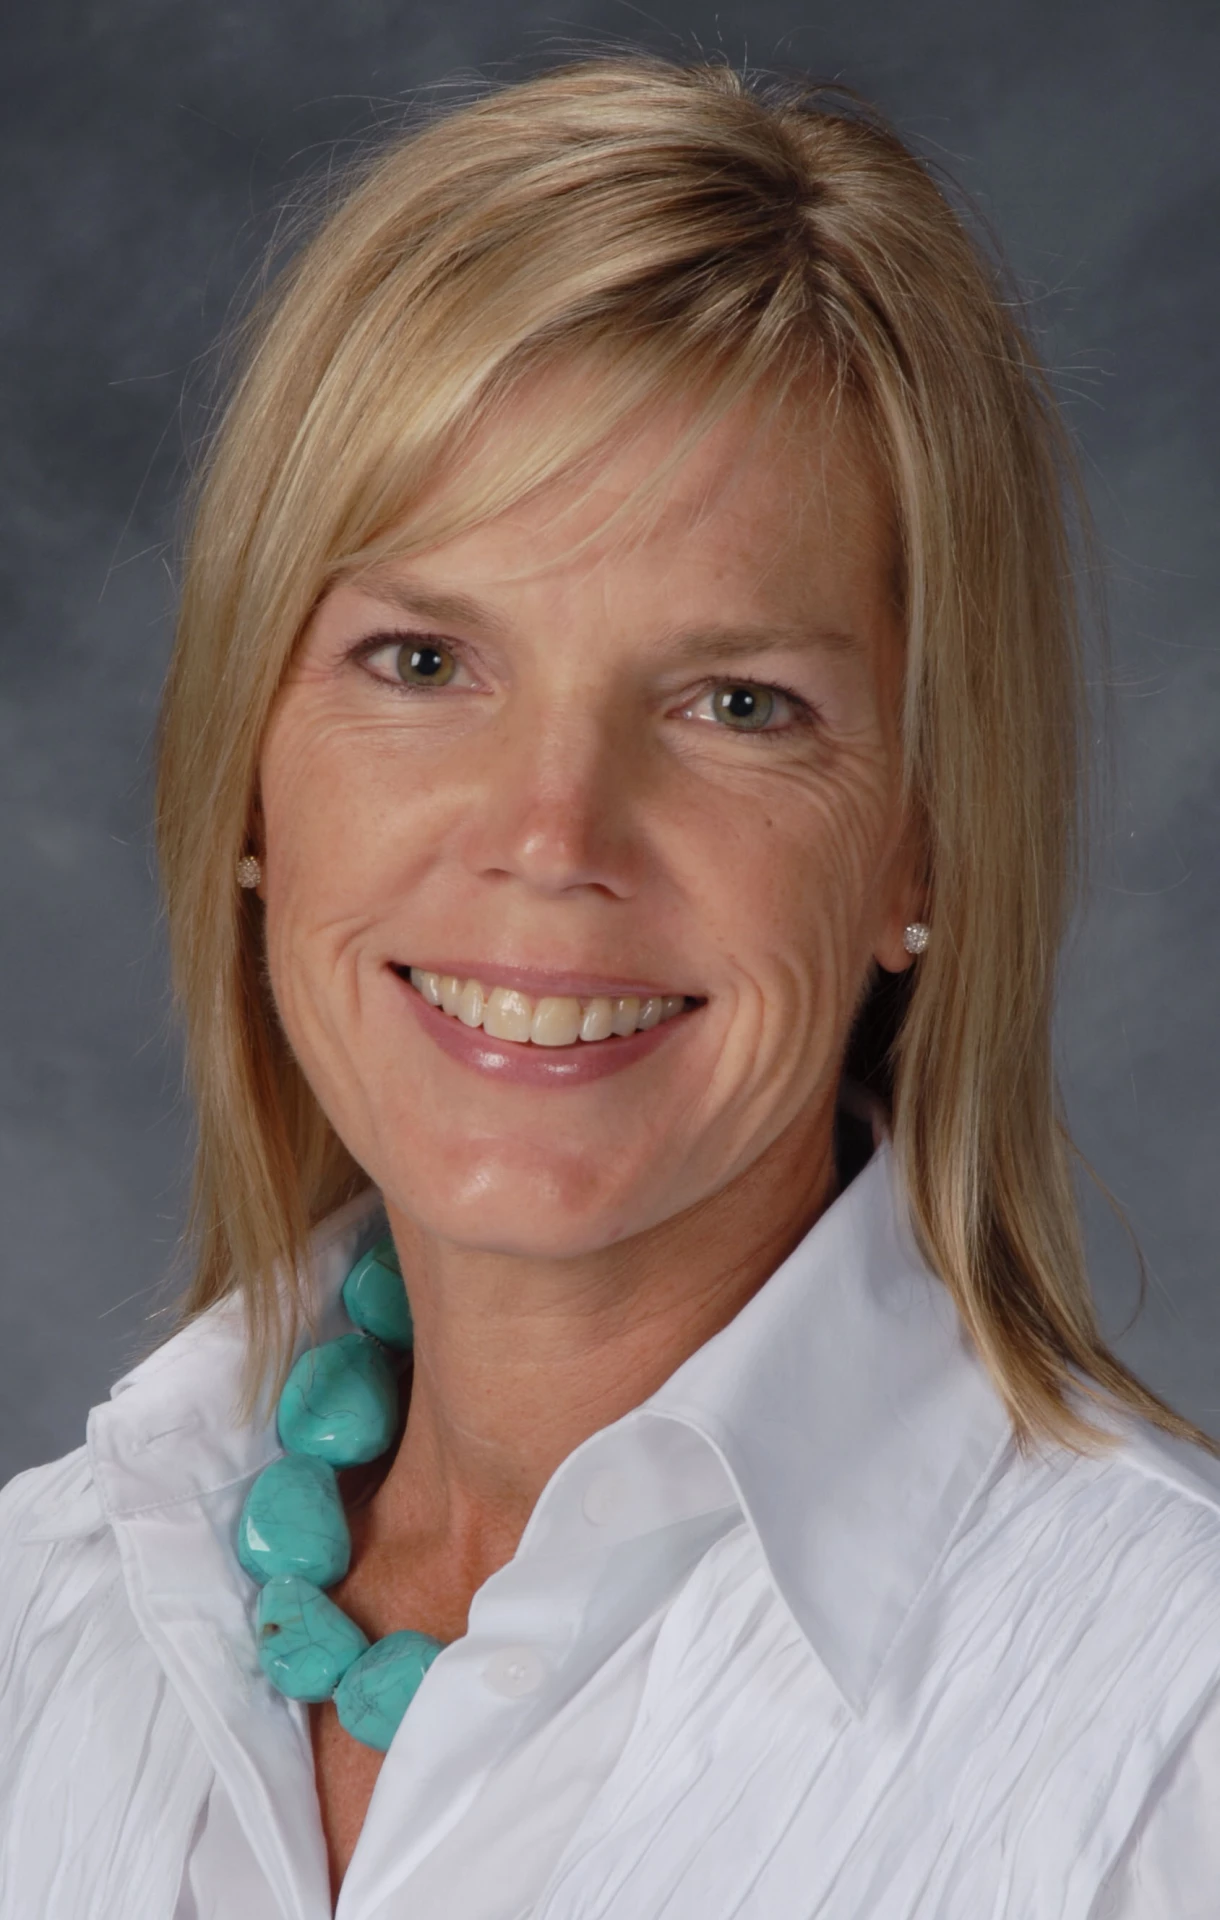 Lynn Gustafson - Foot and Ankle (Podiatry) provider at Wickersham Health Campus